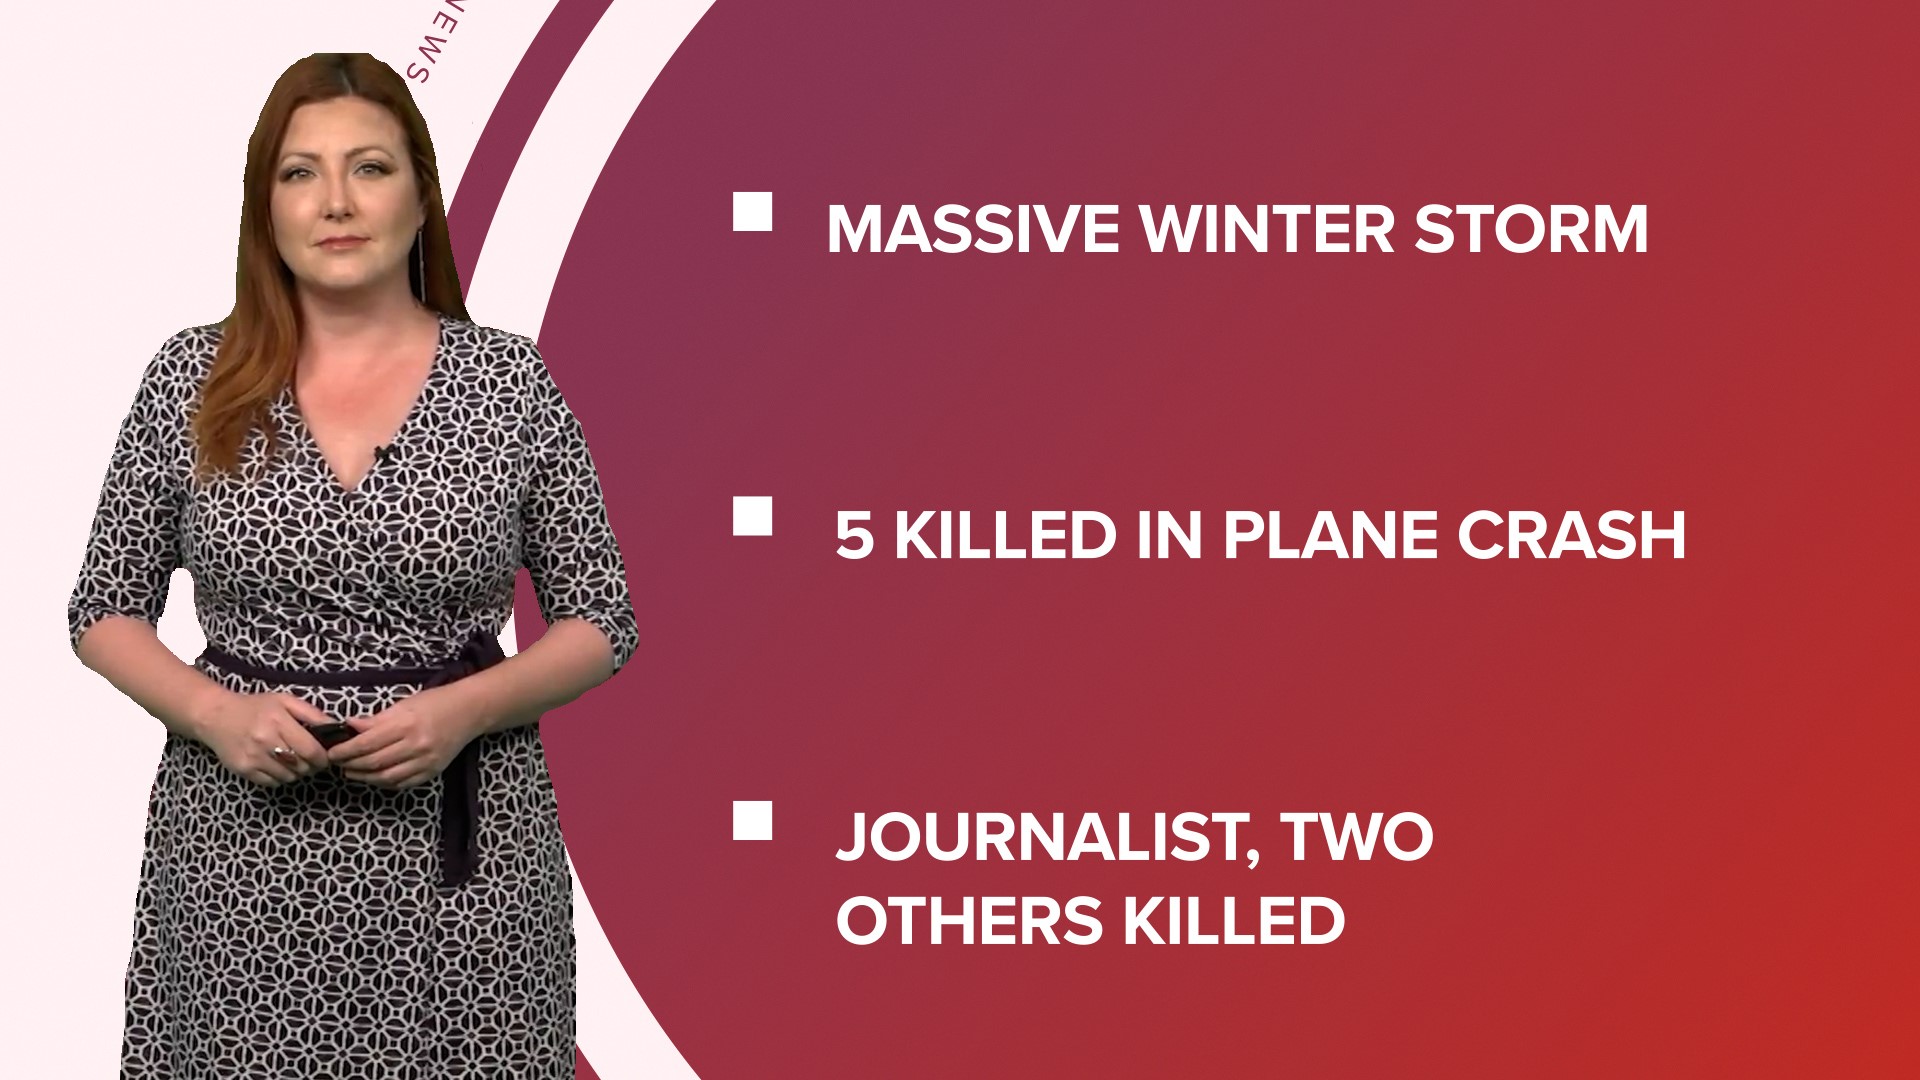 A look at what is happening in the news from winter weather hitting the U.S. to a journalist killed in a Florida shooting and American Airlines cuts summer flights.